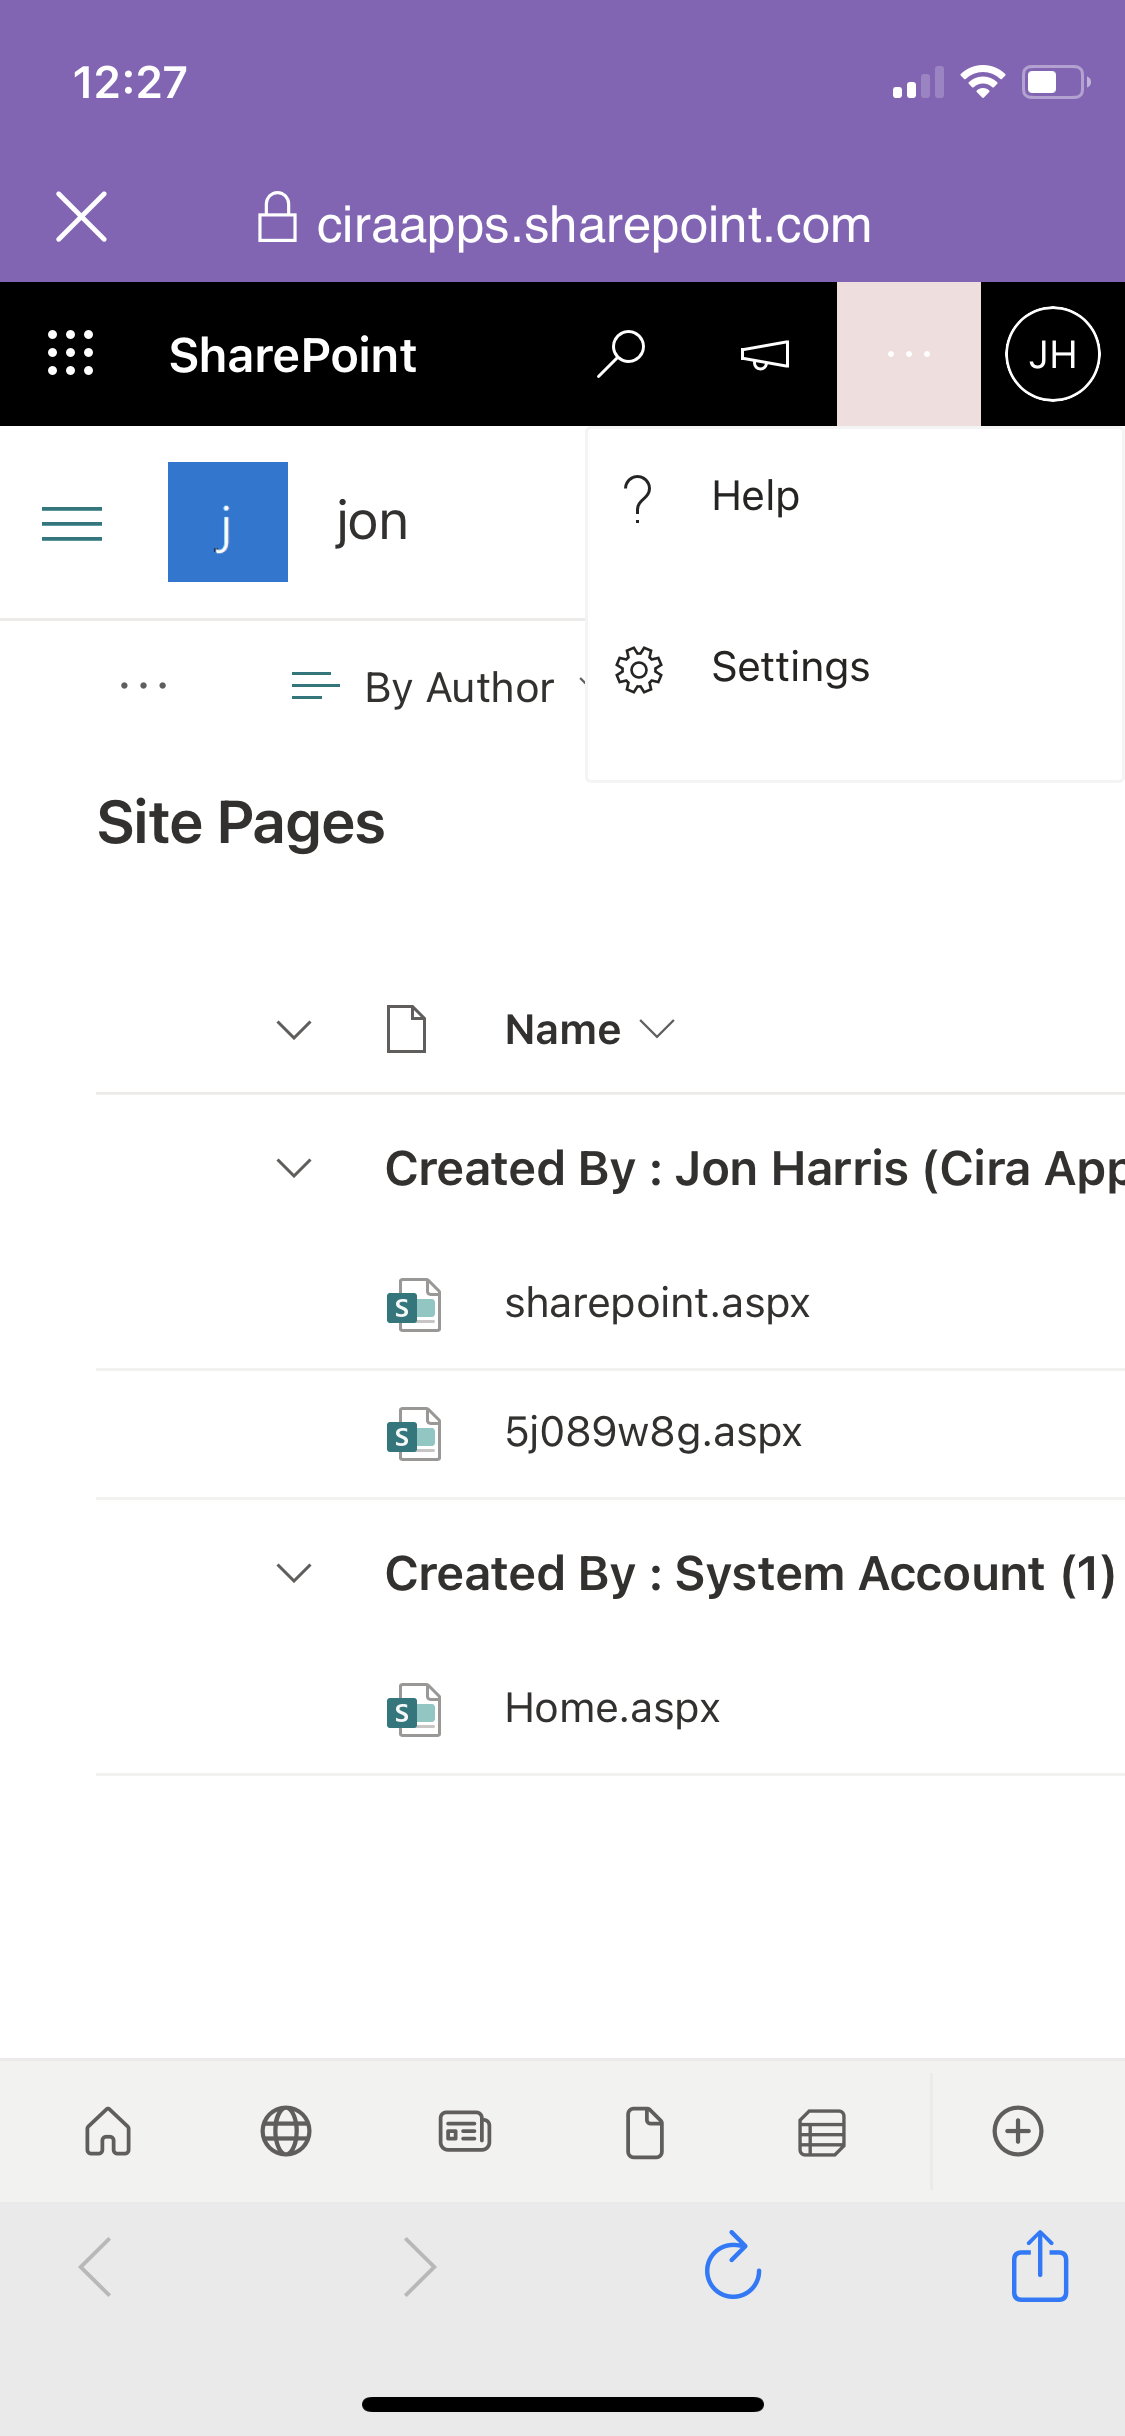 Navigate to “Pages” and find the SharePoint page you want to delete